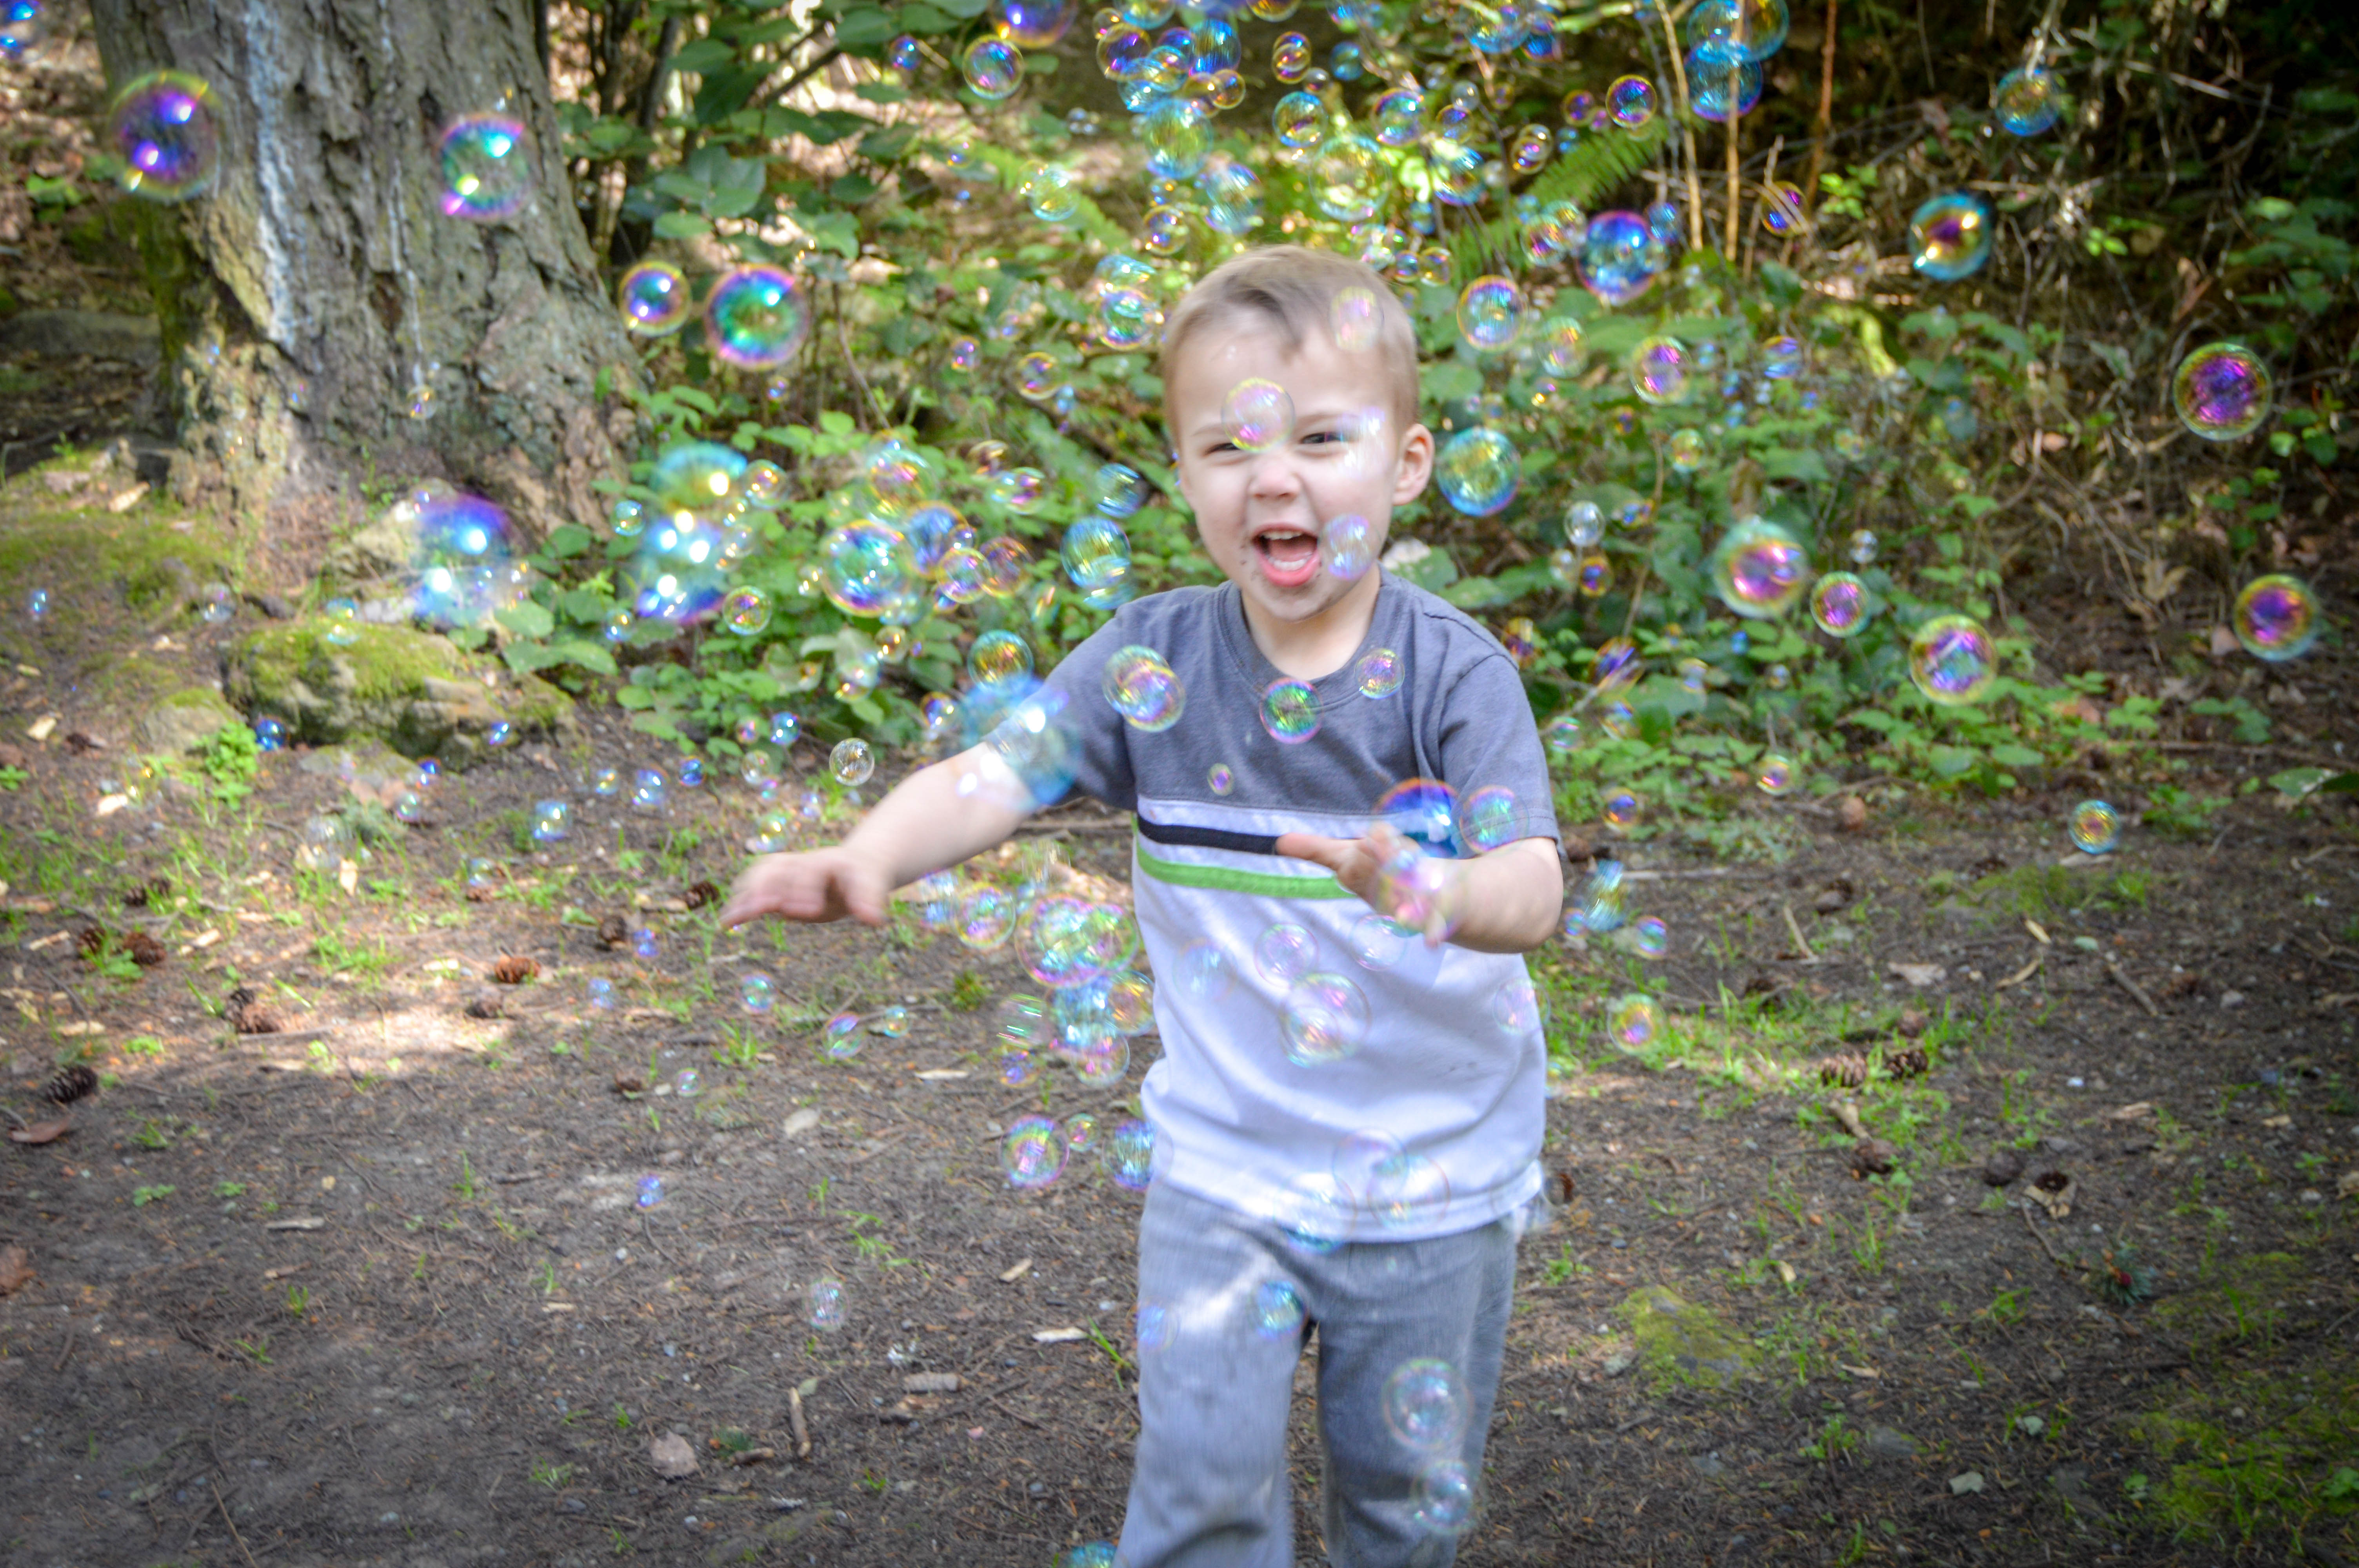 Fun Camping Activities for Toddlers #4 - Play with a bubble machine